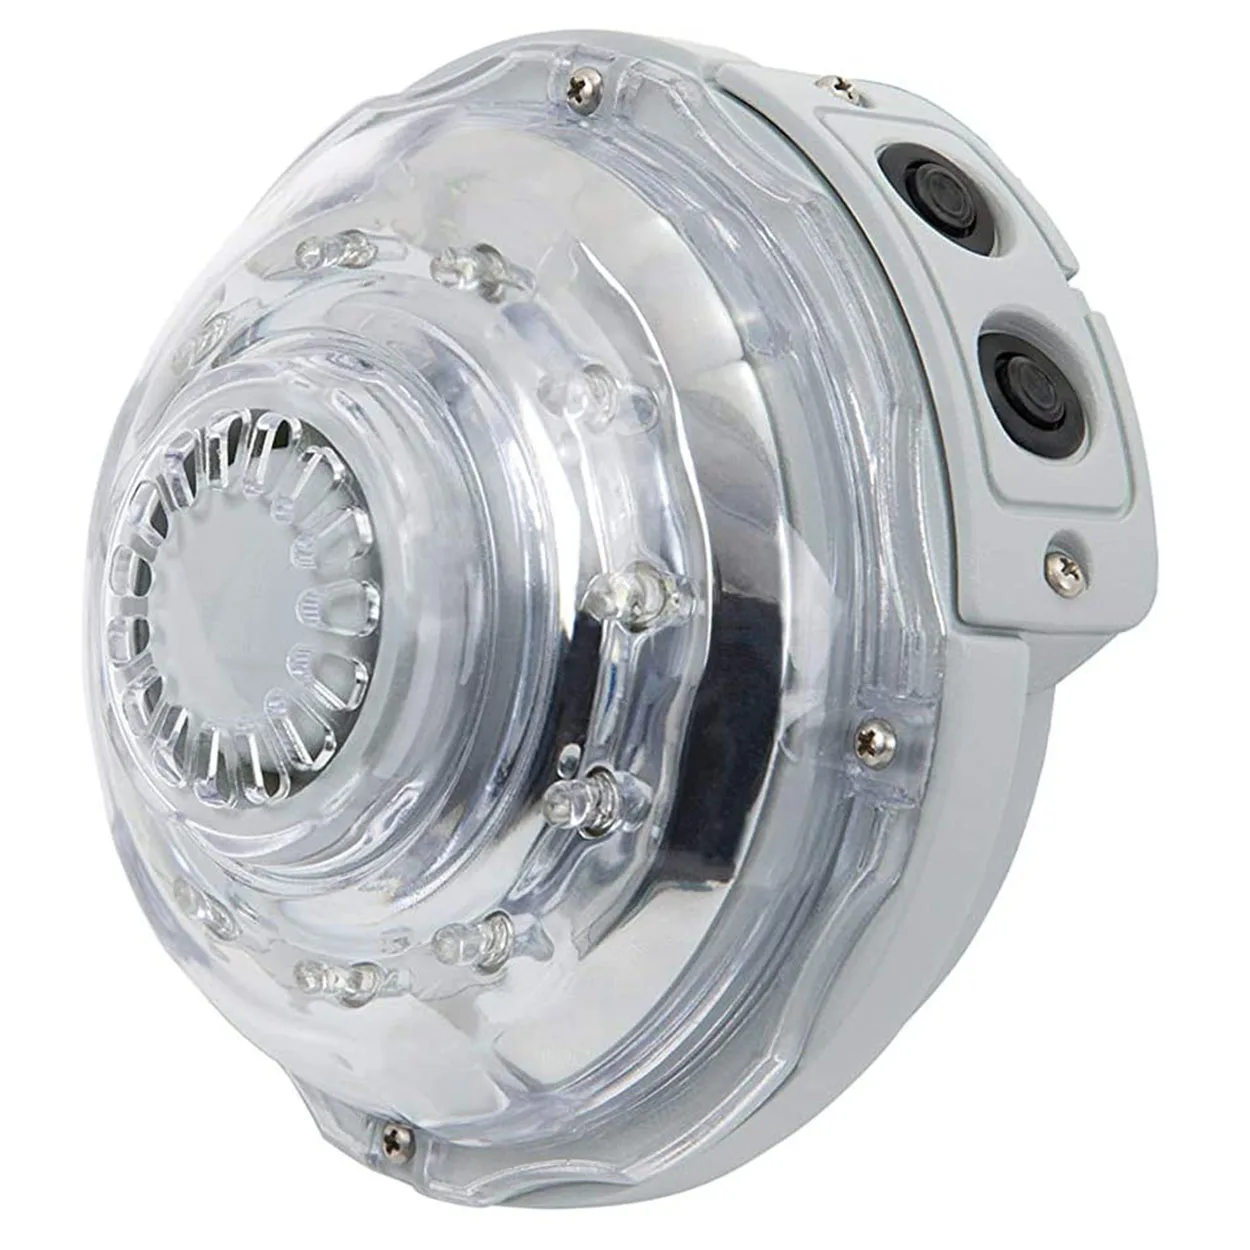 Intex 28504 LED Light With Hydroelectric Power for Combo Spa